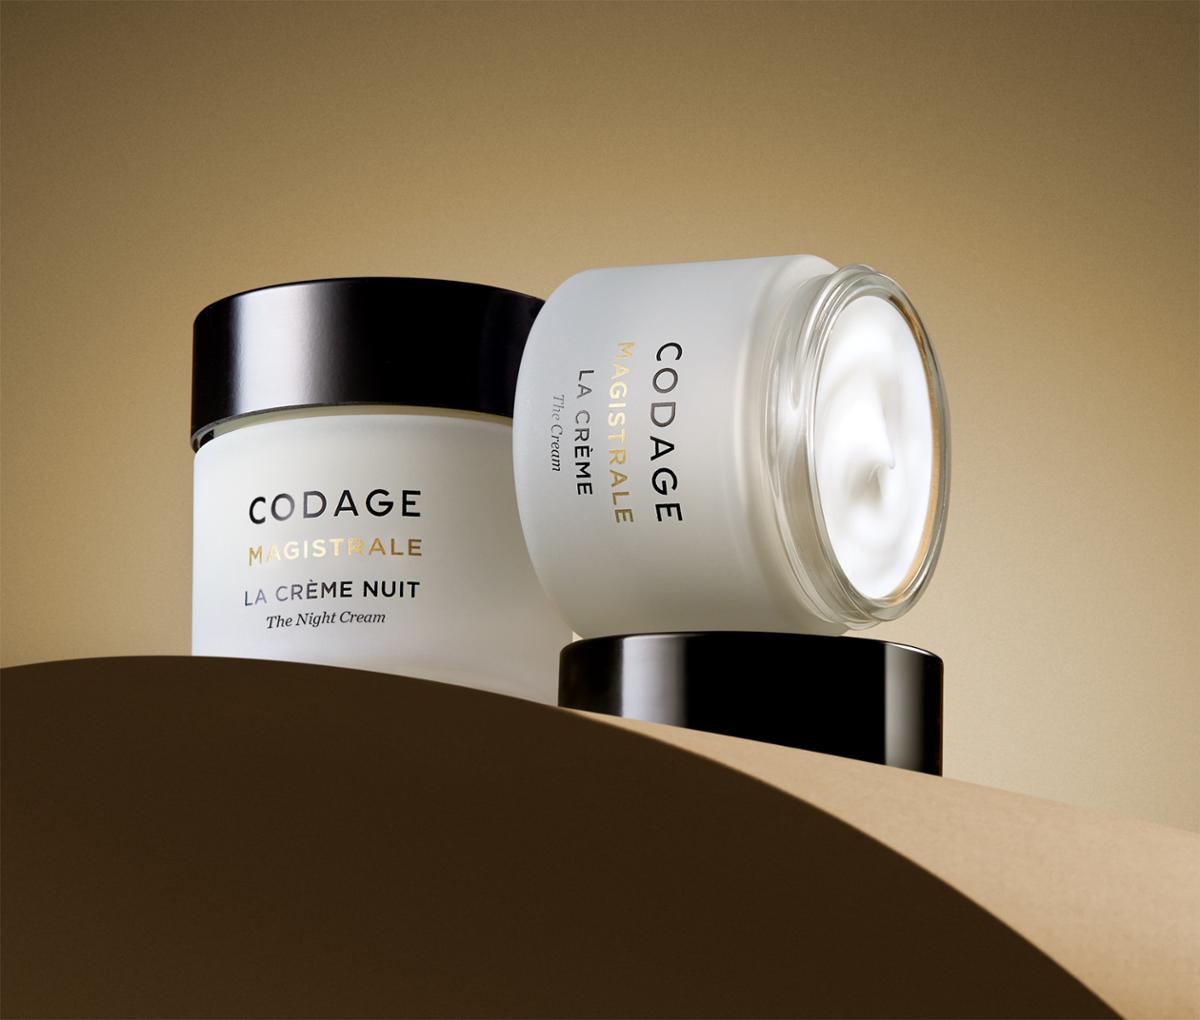 Codage plans to expand the Magistrale line in future with additional products / Codage Paris